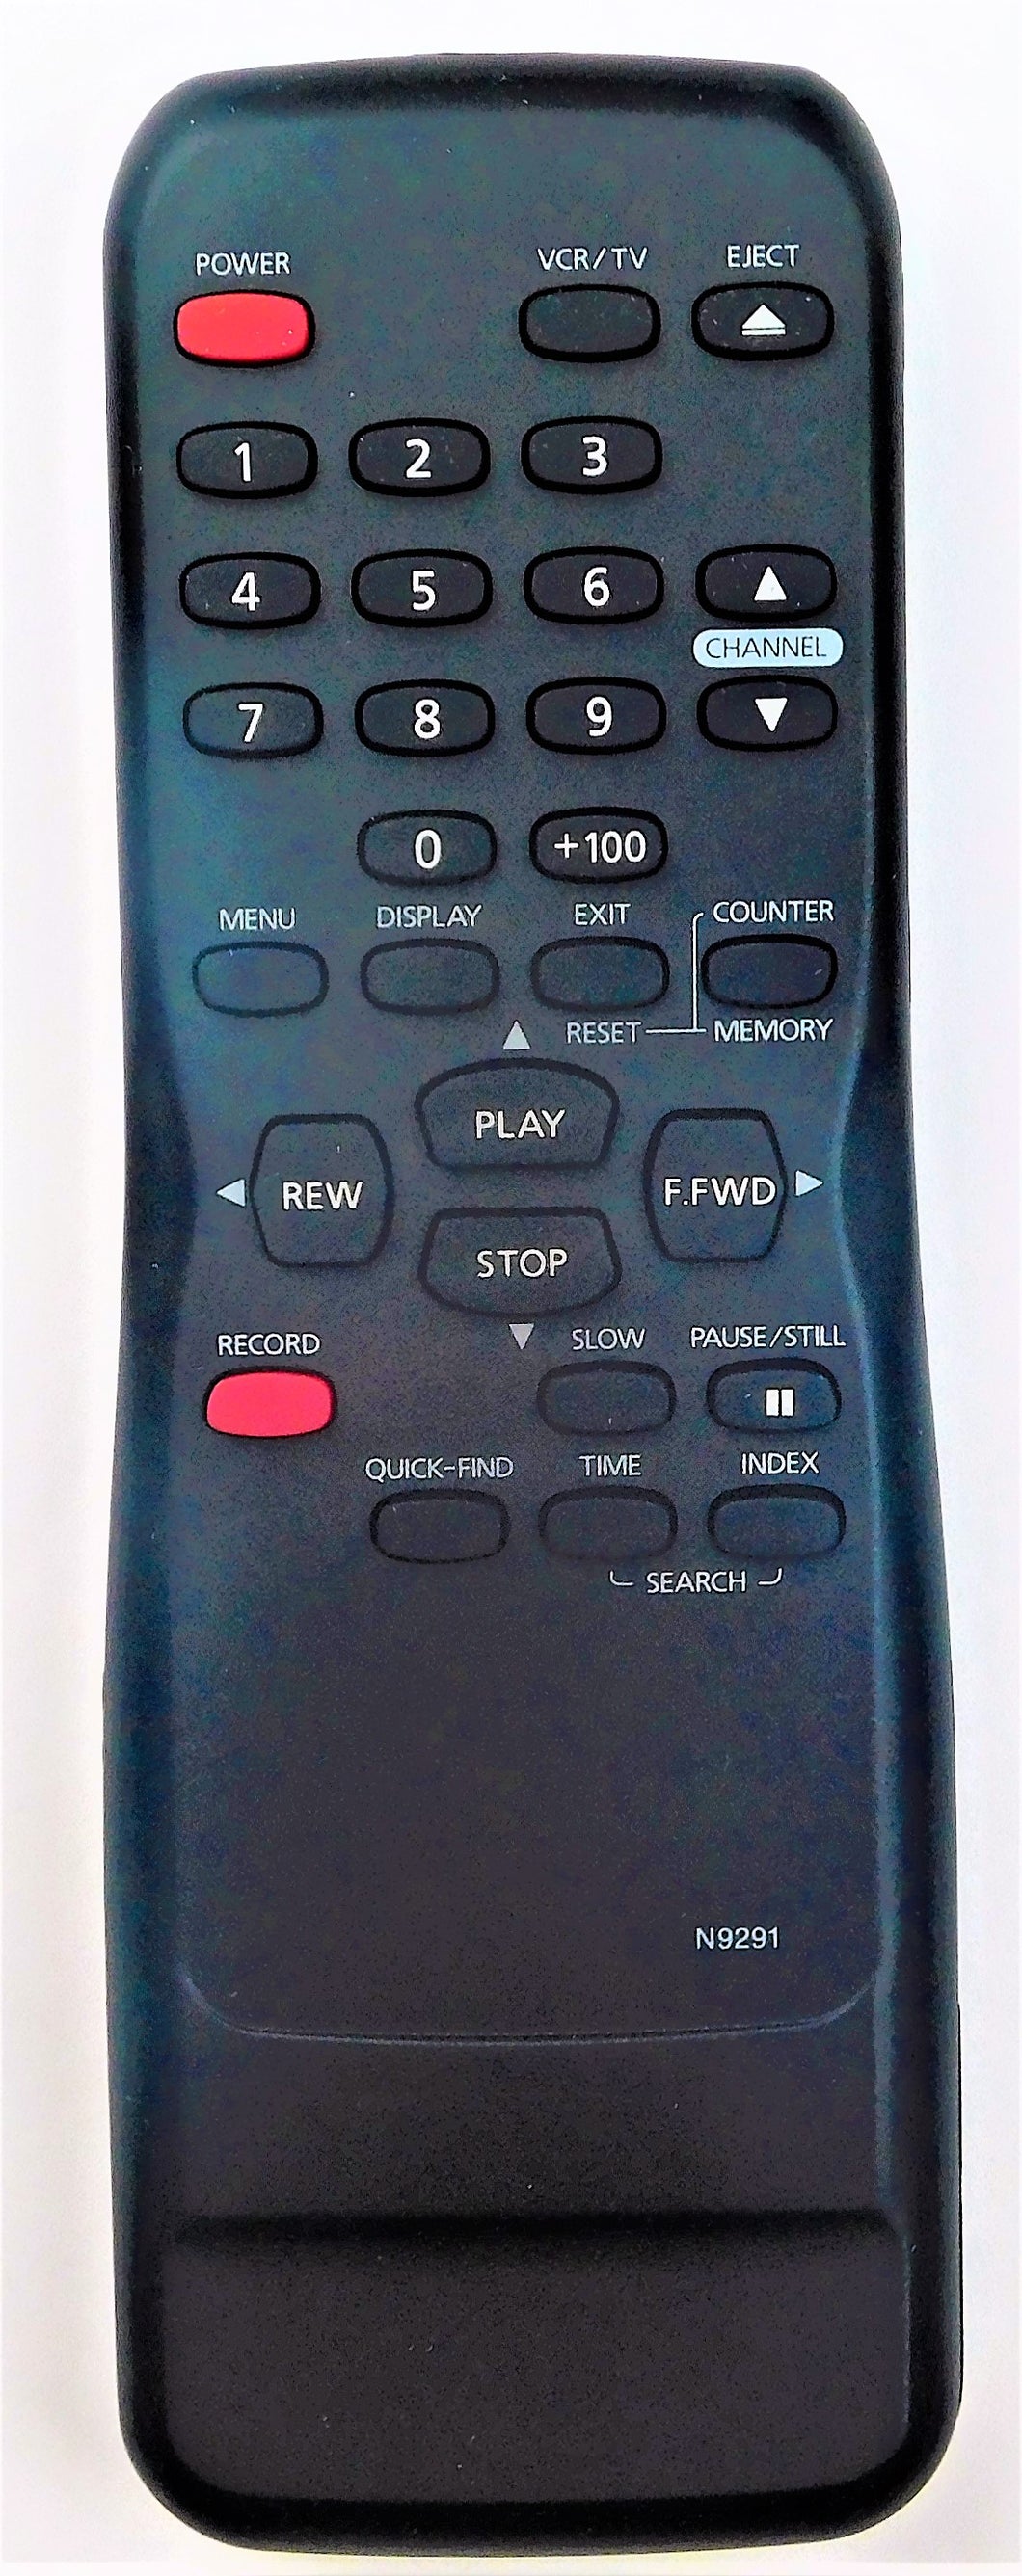 Original OEM replacement remote control for Funai, Symphonic VCR Players N9291UD